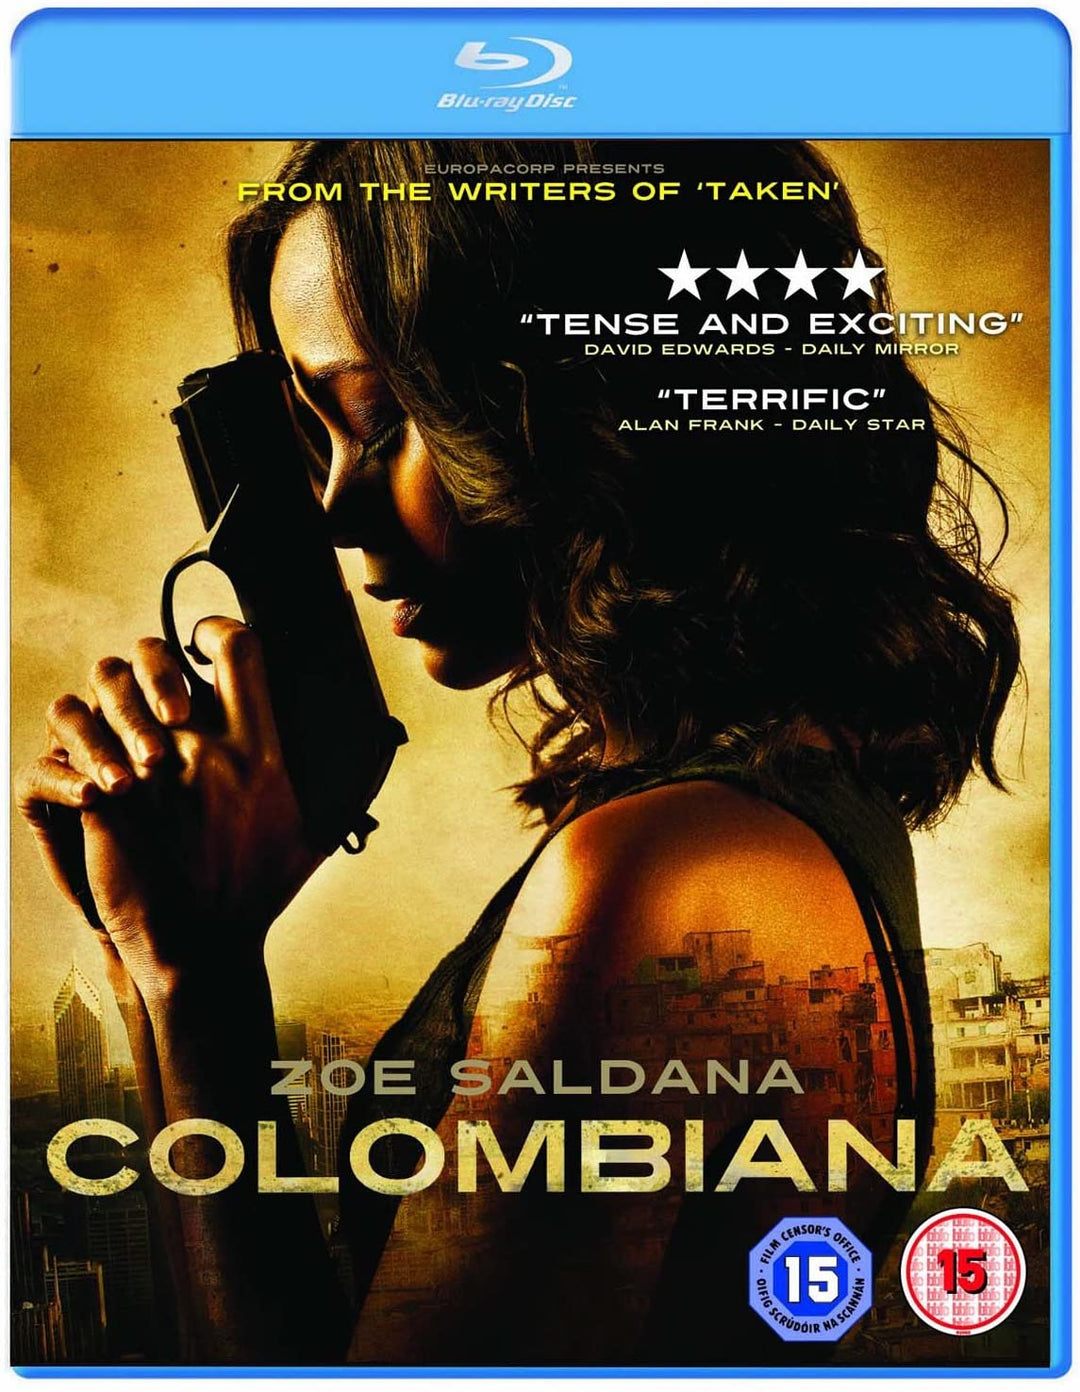 Colombiana - Action/Thriller [Blu-ray]